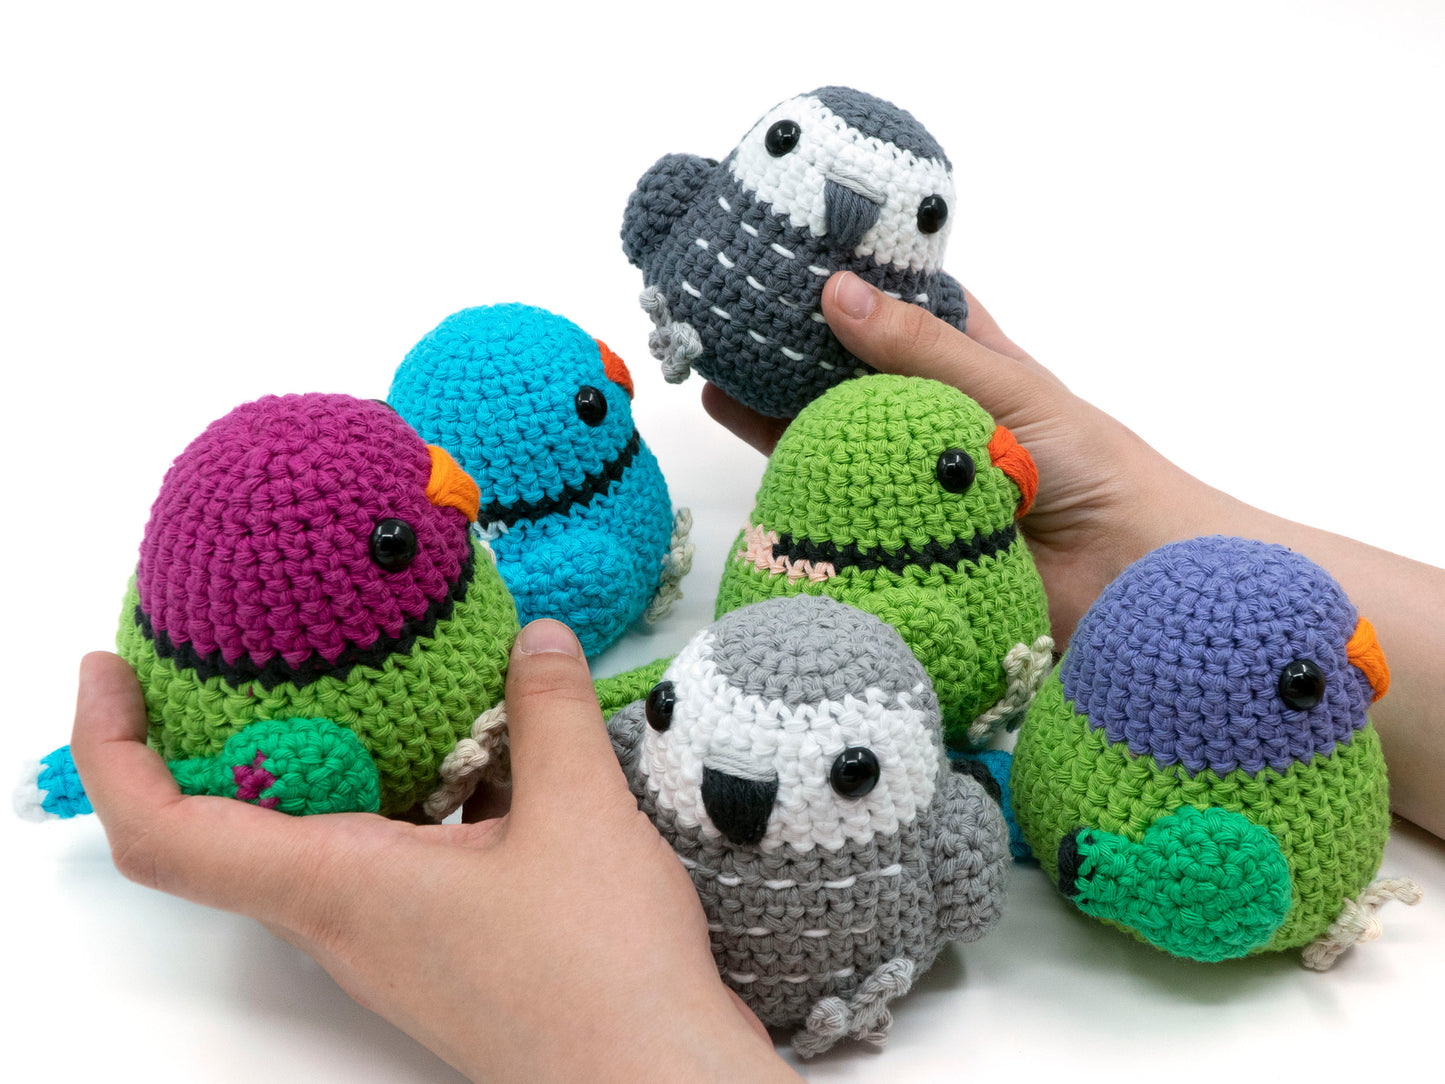 amigurumi crochet parrot pattern bundle with african grey plum-headed parakeet and indian ringneck being held for size comparison